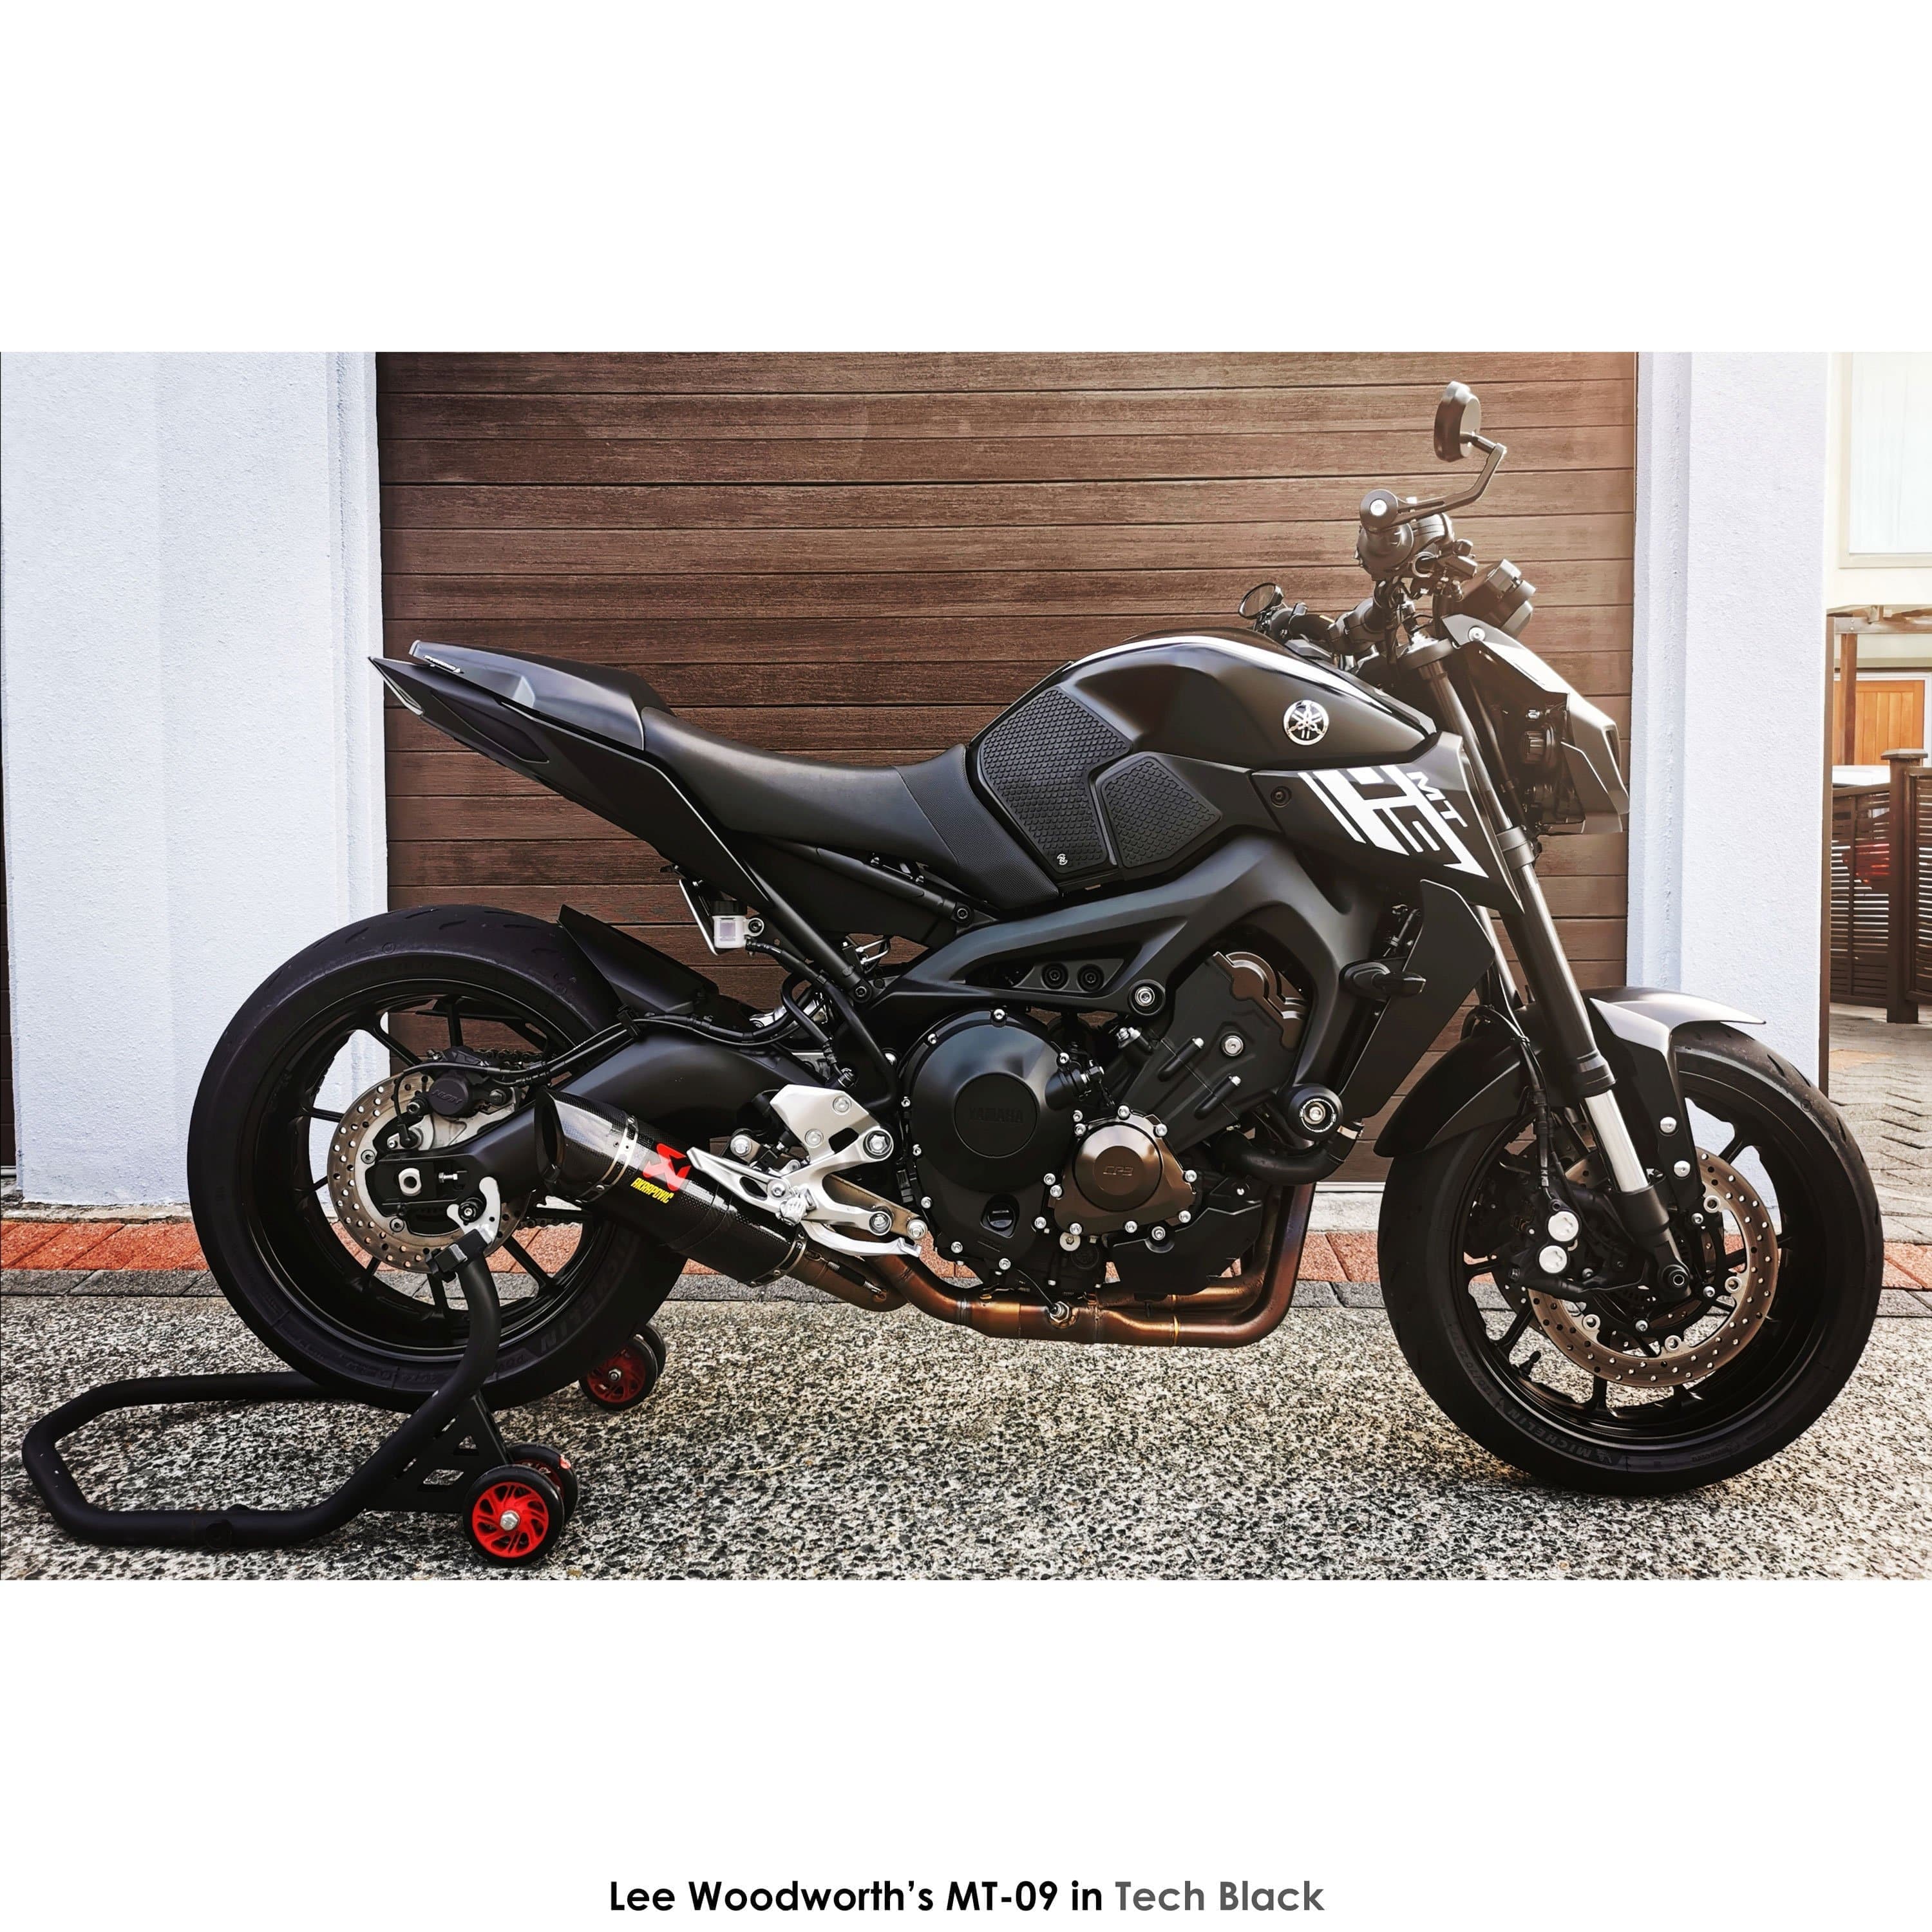 Pyramid Seat Cowl | Matte Black | Yamaha MT-09 SP 2018>2020-12412M-Seat Cowls-Pyramid Motorcycle Accessories